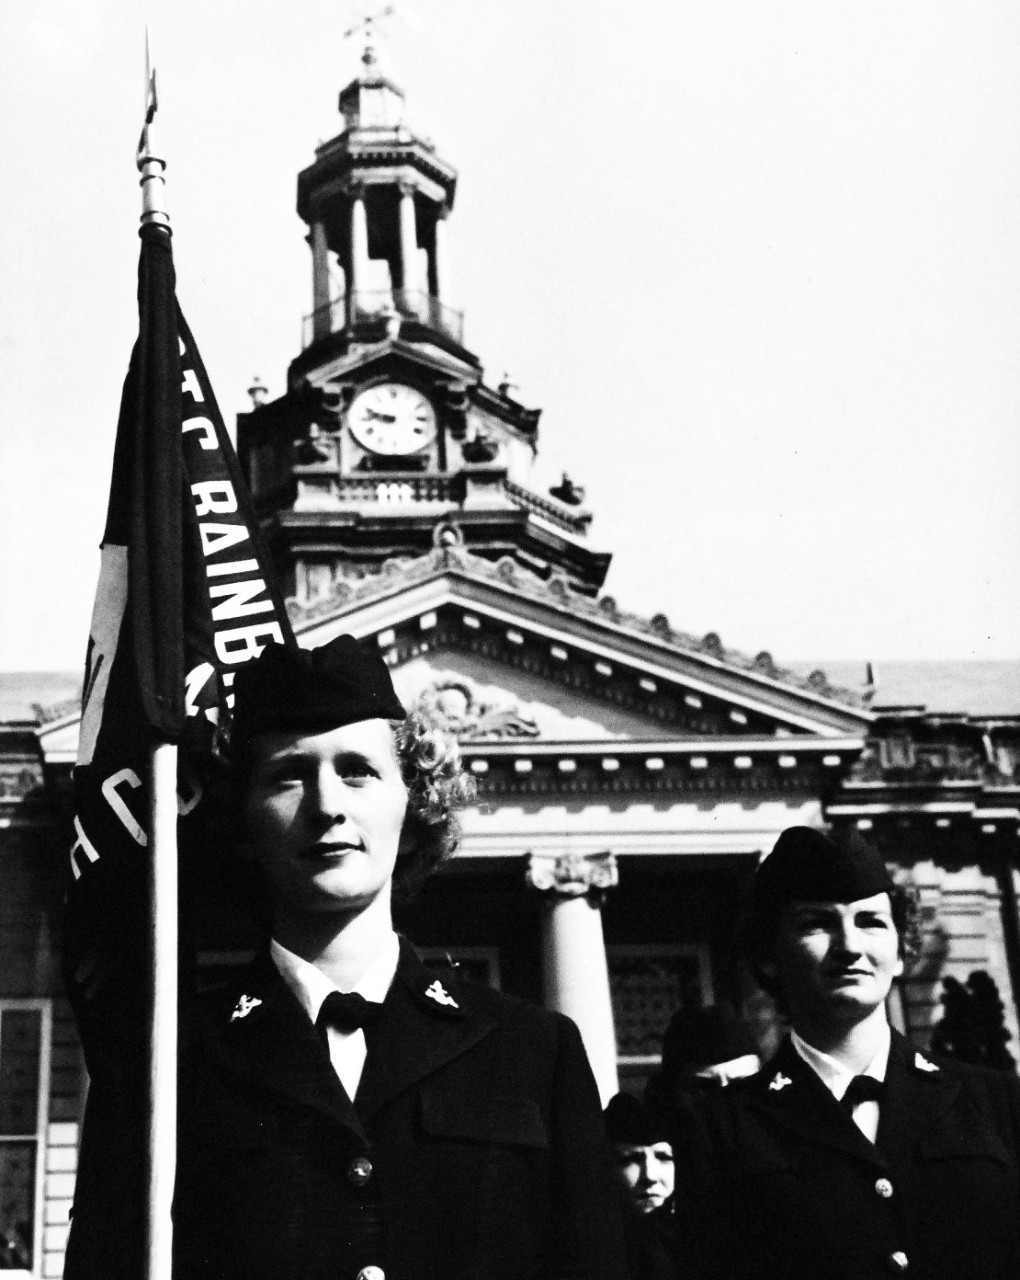 USN 708648:   Ten Years of the WAVY Blue, July 1952.     Recruit Company.  Recruit Petty Officer Second Class P. B. Schofield carries the guidon which marks her company during their training period.  The WAVES assemble each morning following their breakfast and muster (roll call) to march to their classes at the Naval Training Center, Bainbridge, Maryland.   Photograph released July 24, 1952.  Official U.S. Navy photograph, now in the collections of the National Archives.  